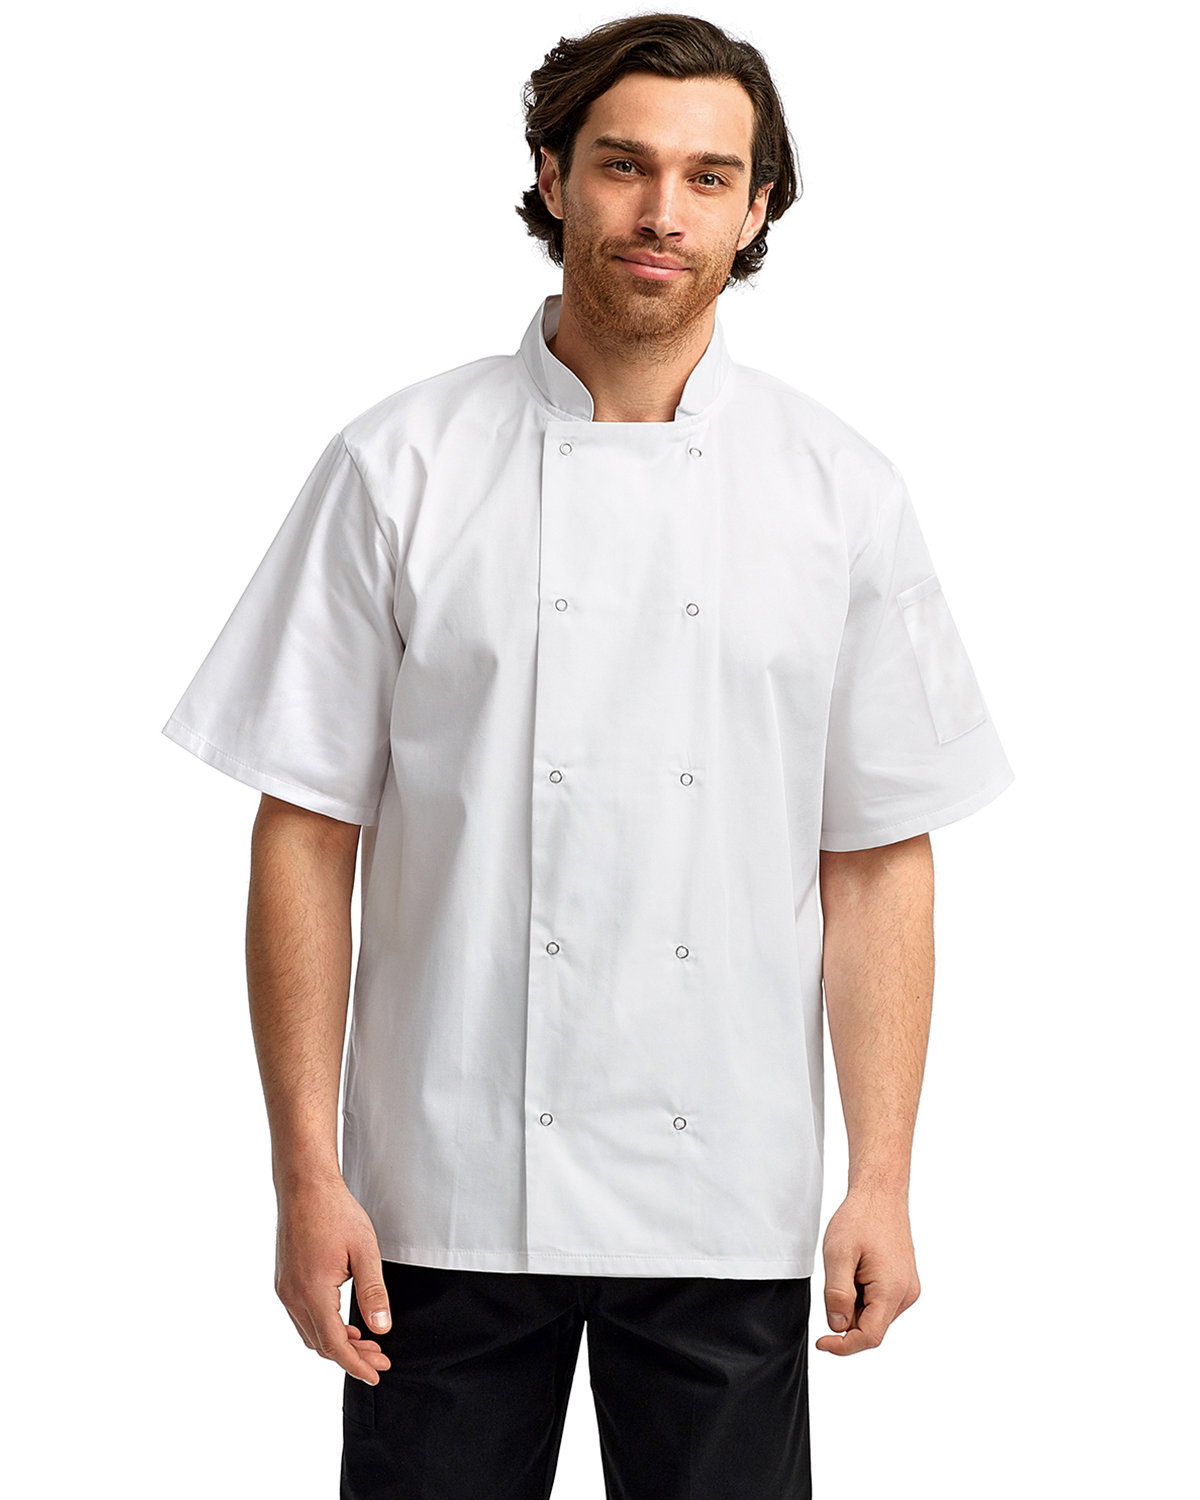 Artisan Collection by Reprime Unisex Studded Front Short-Sleeve Chef's Coat WHITE 